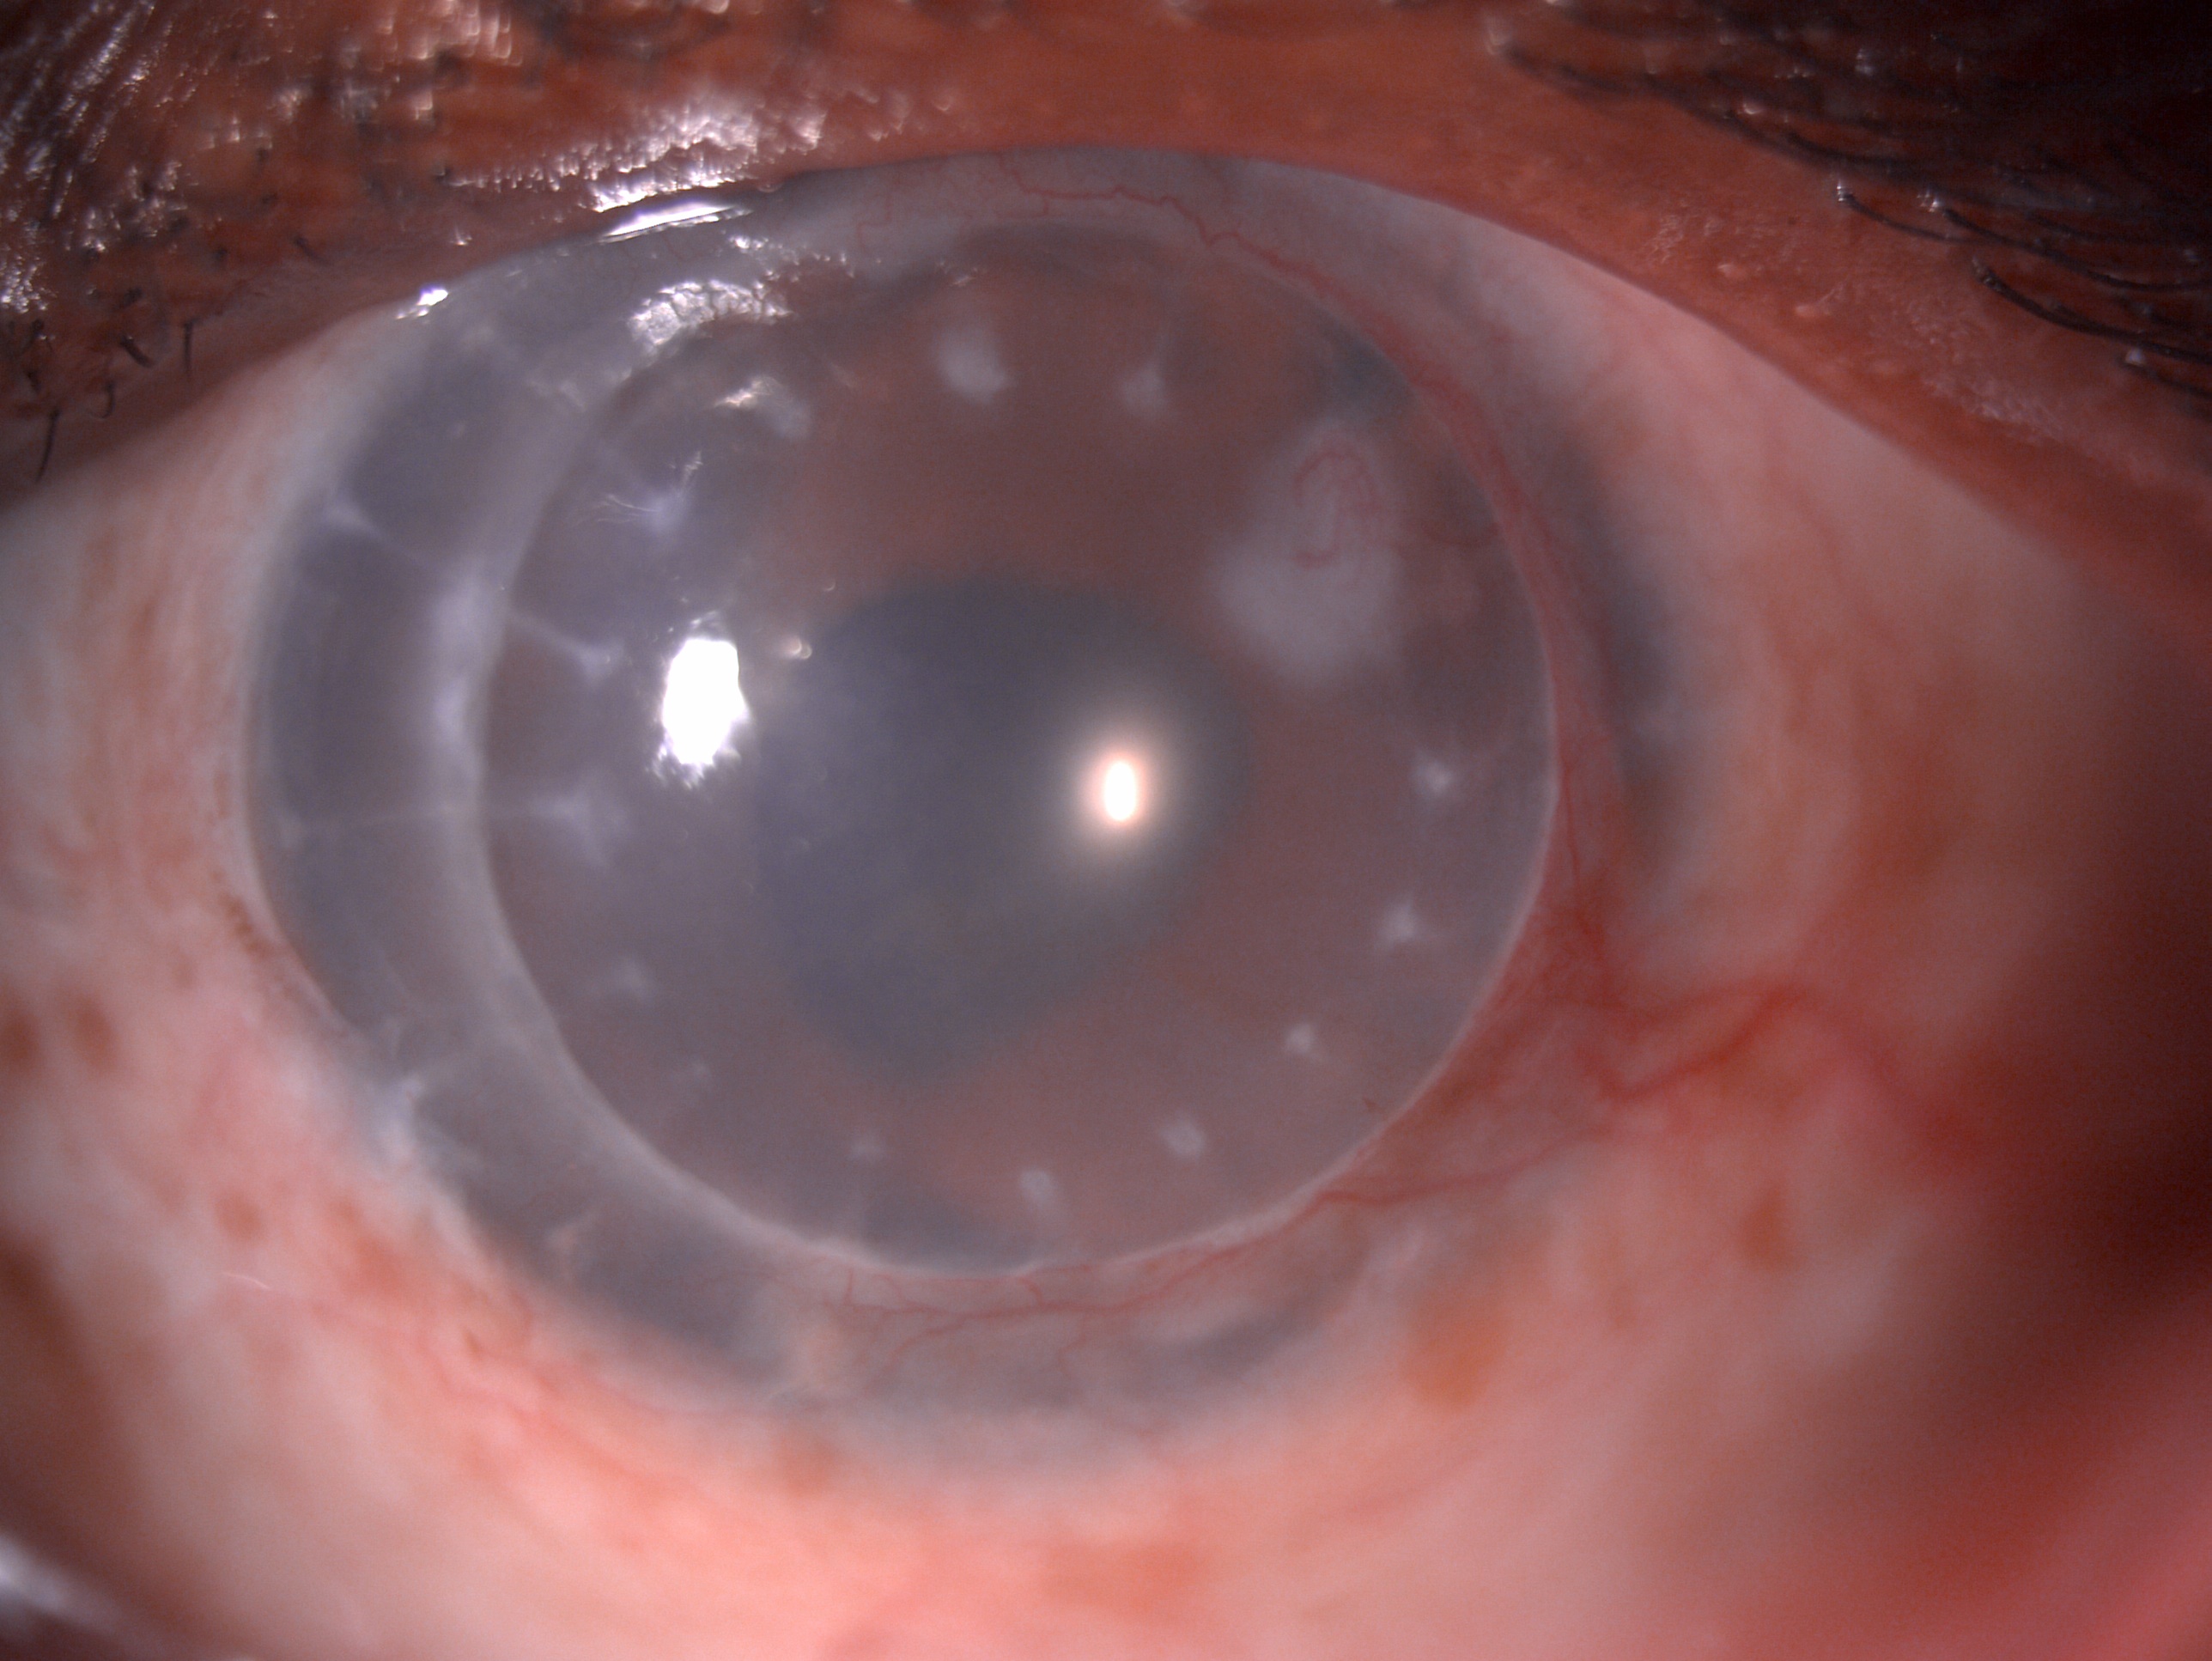 Digital slit lamp image of the patient's left eye depicting mild circumciliary congestion, well opposed graft host junction, stromal edema, suture marks, stromal scar with ghost vessels at 2 o'clock adjacent to the graft host junction